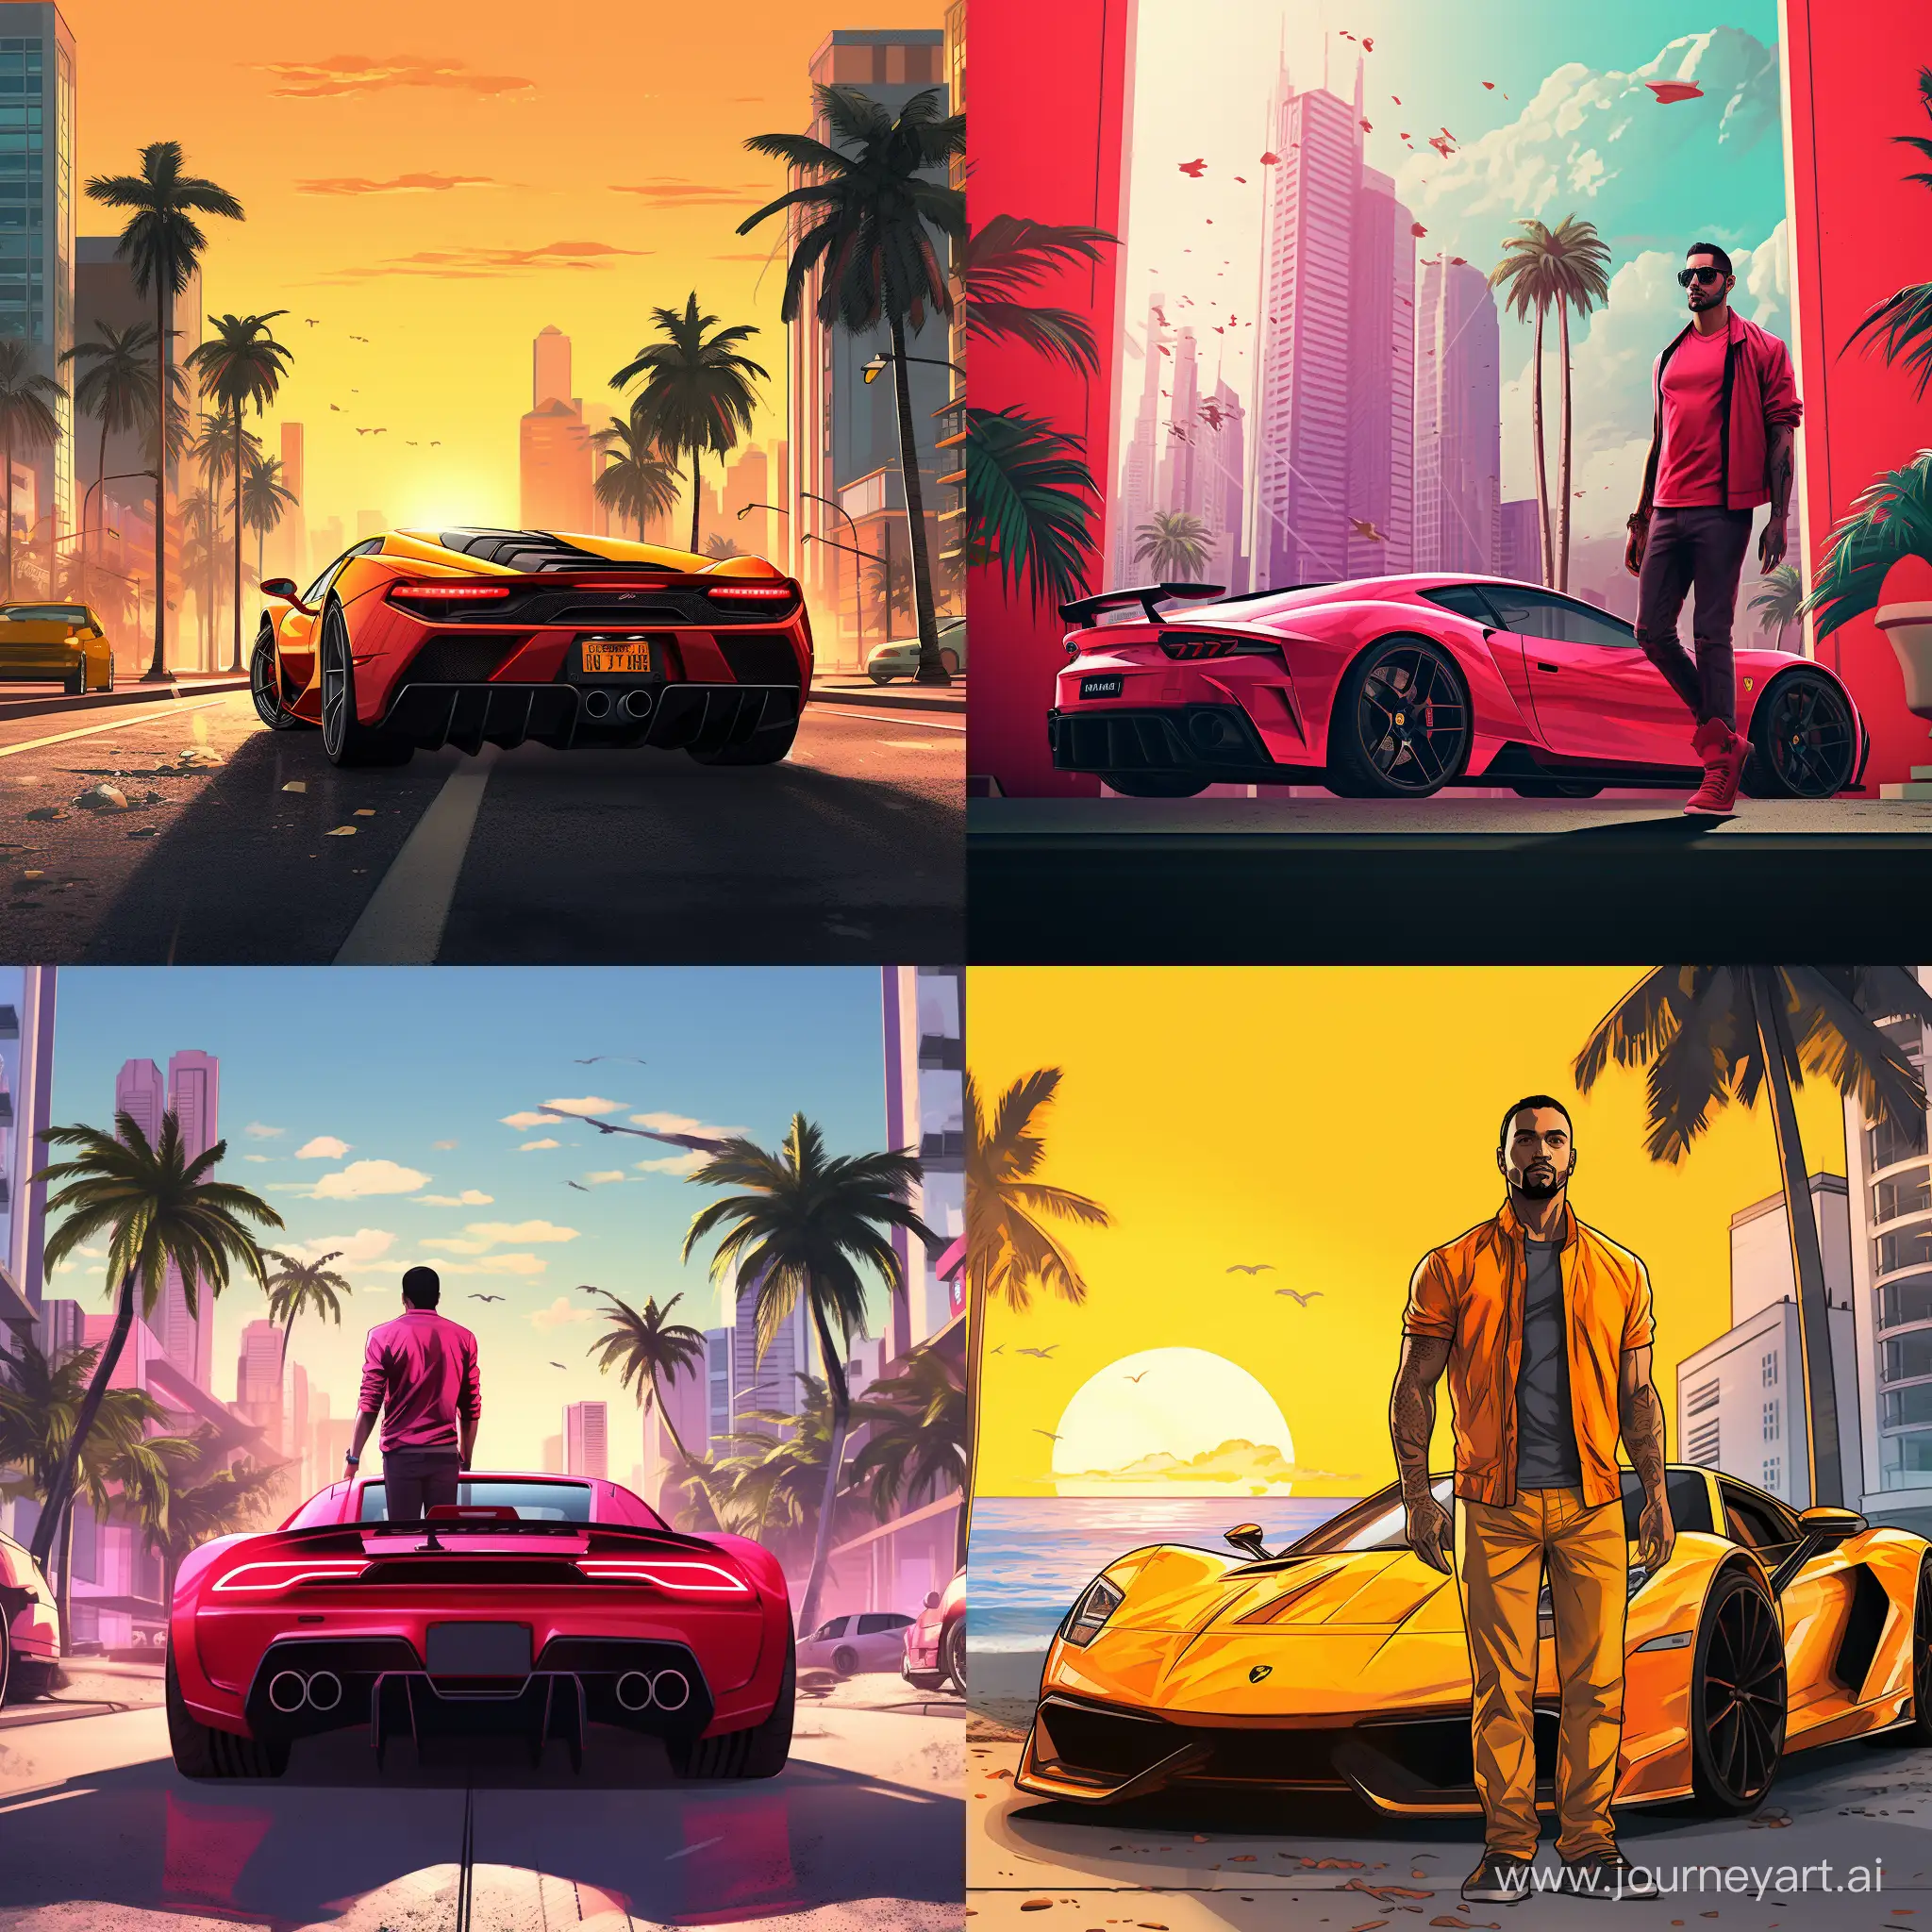 GTA-6-Miami-Poster-with-Actionpacked-Scenes-and-11-Aspect-Ratio